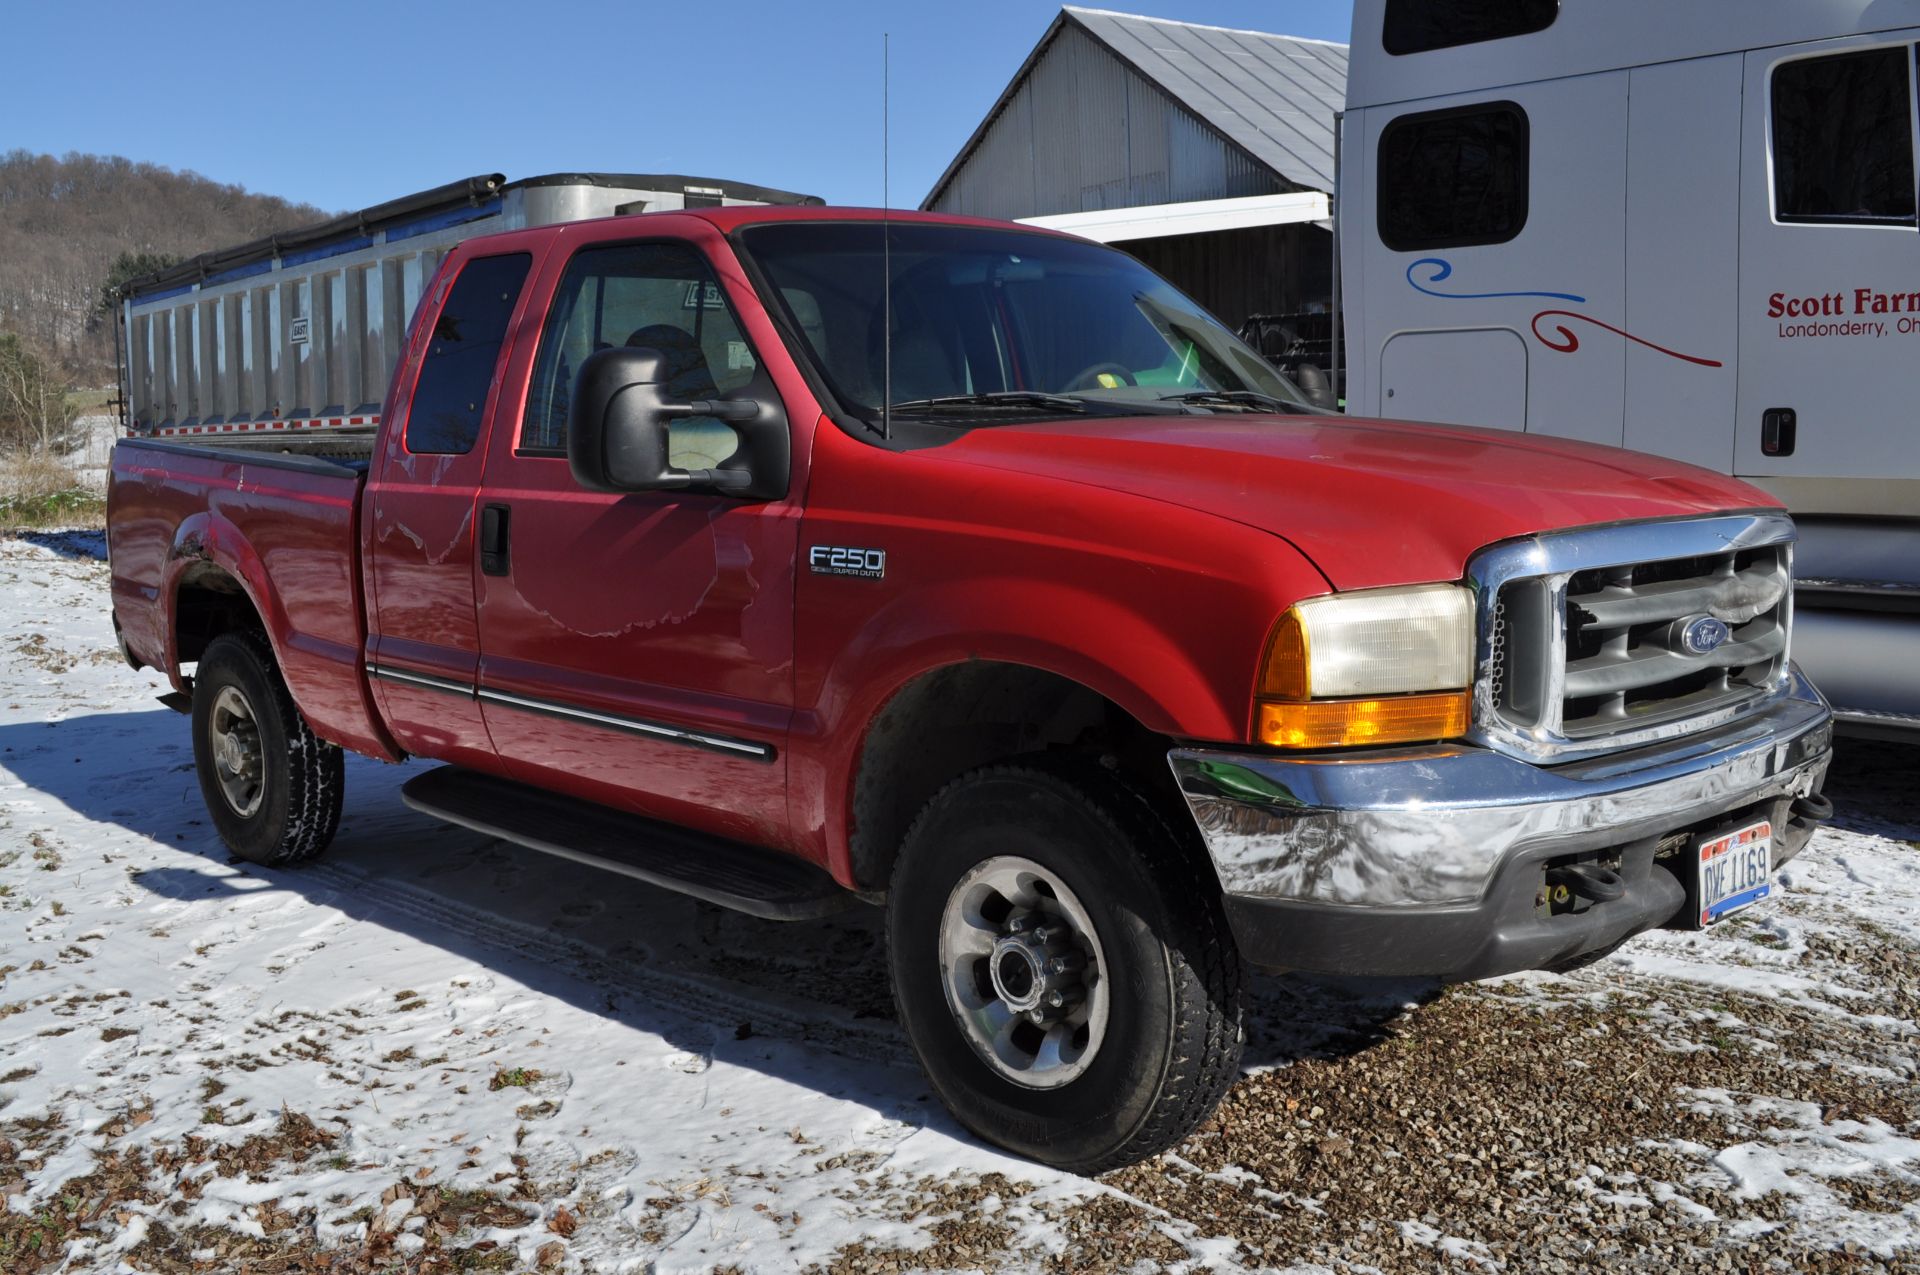 1999 Ford F250 pickup, ext cab, short bed, 7.3 Power Stroke diesel, auto, 4x4, 235/85R16 tires - Image 2 of 27